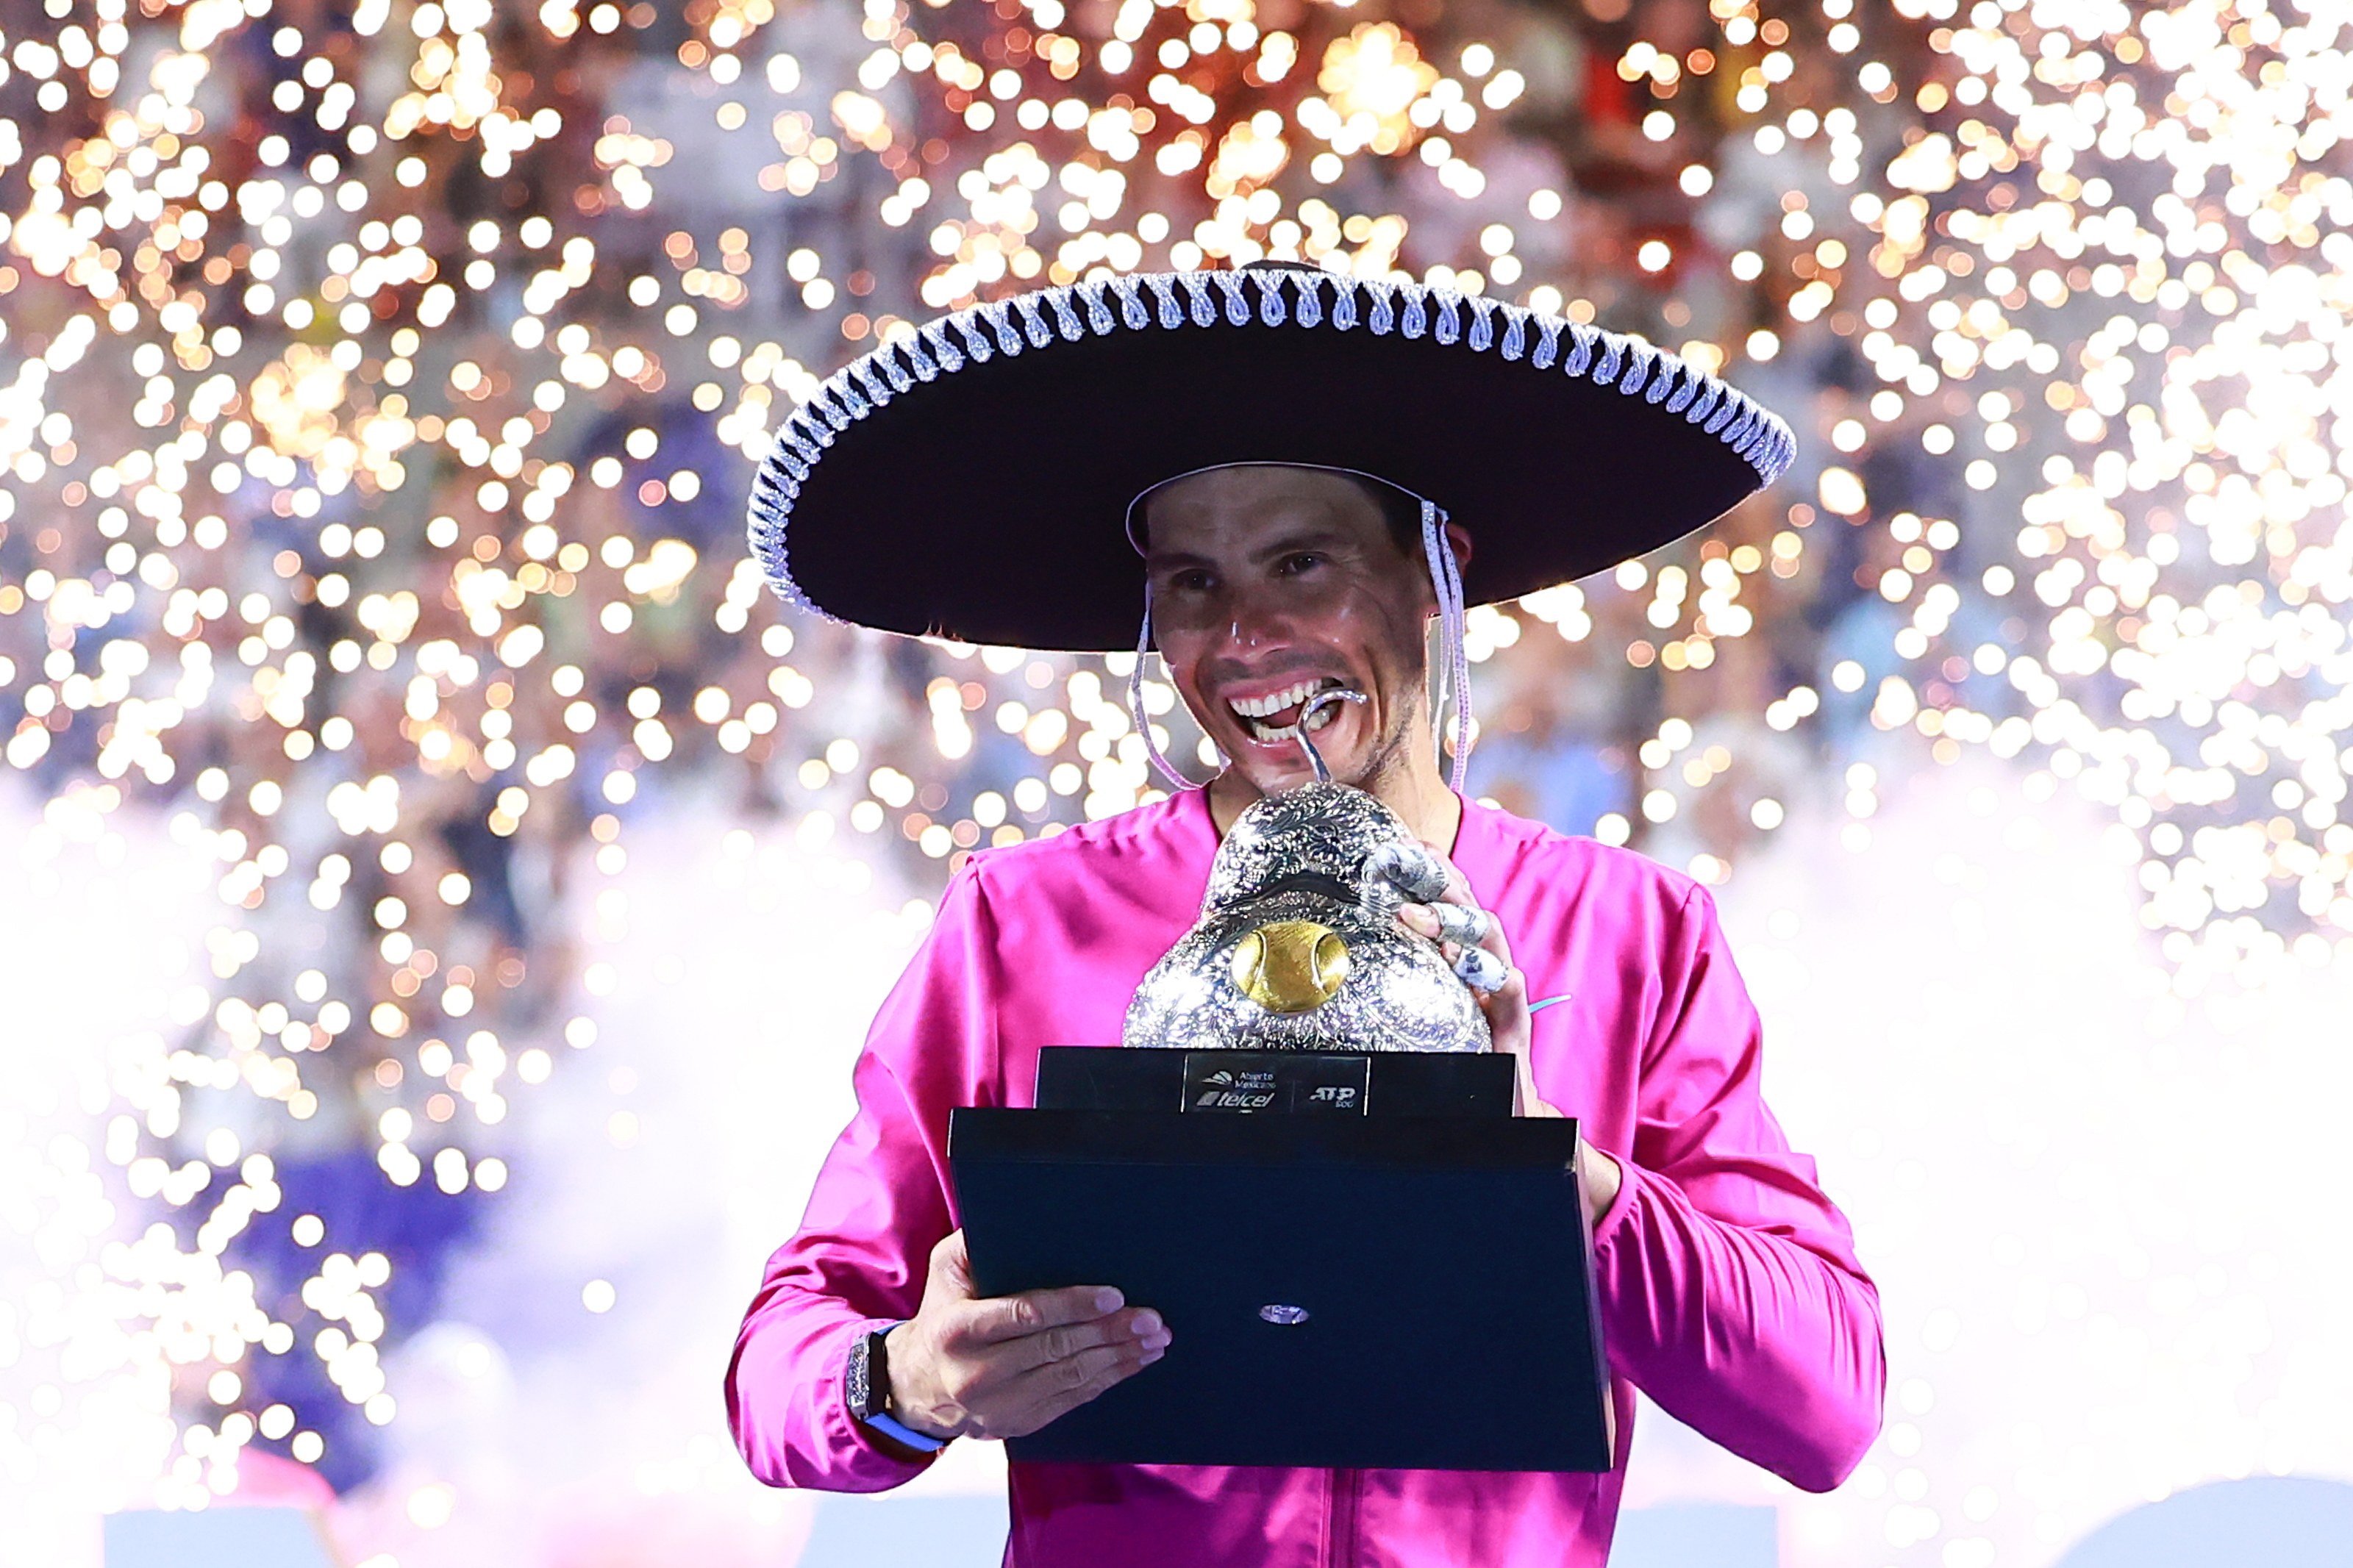 Rafael Nadal continues perfect start to season with Acapulco title